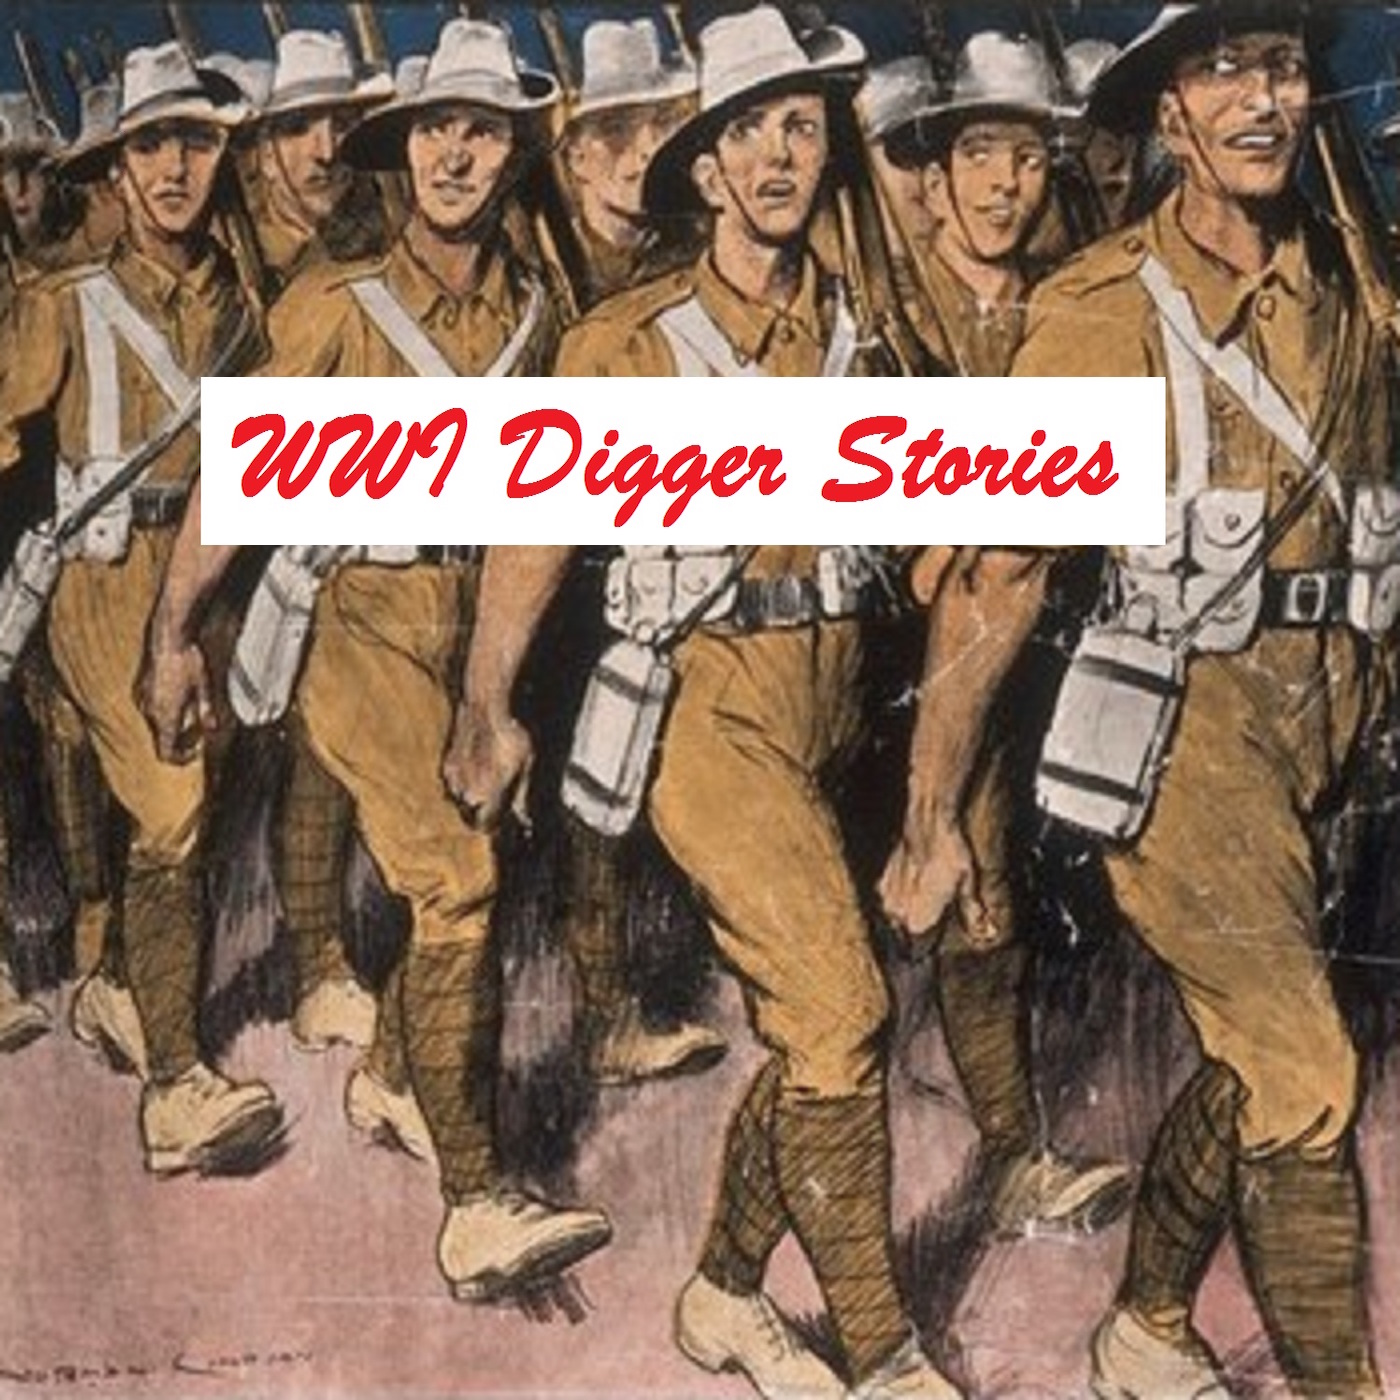 WWI Digger Stories Podcast